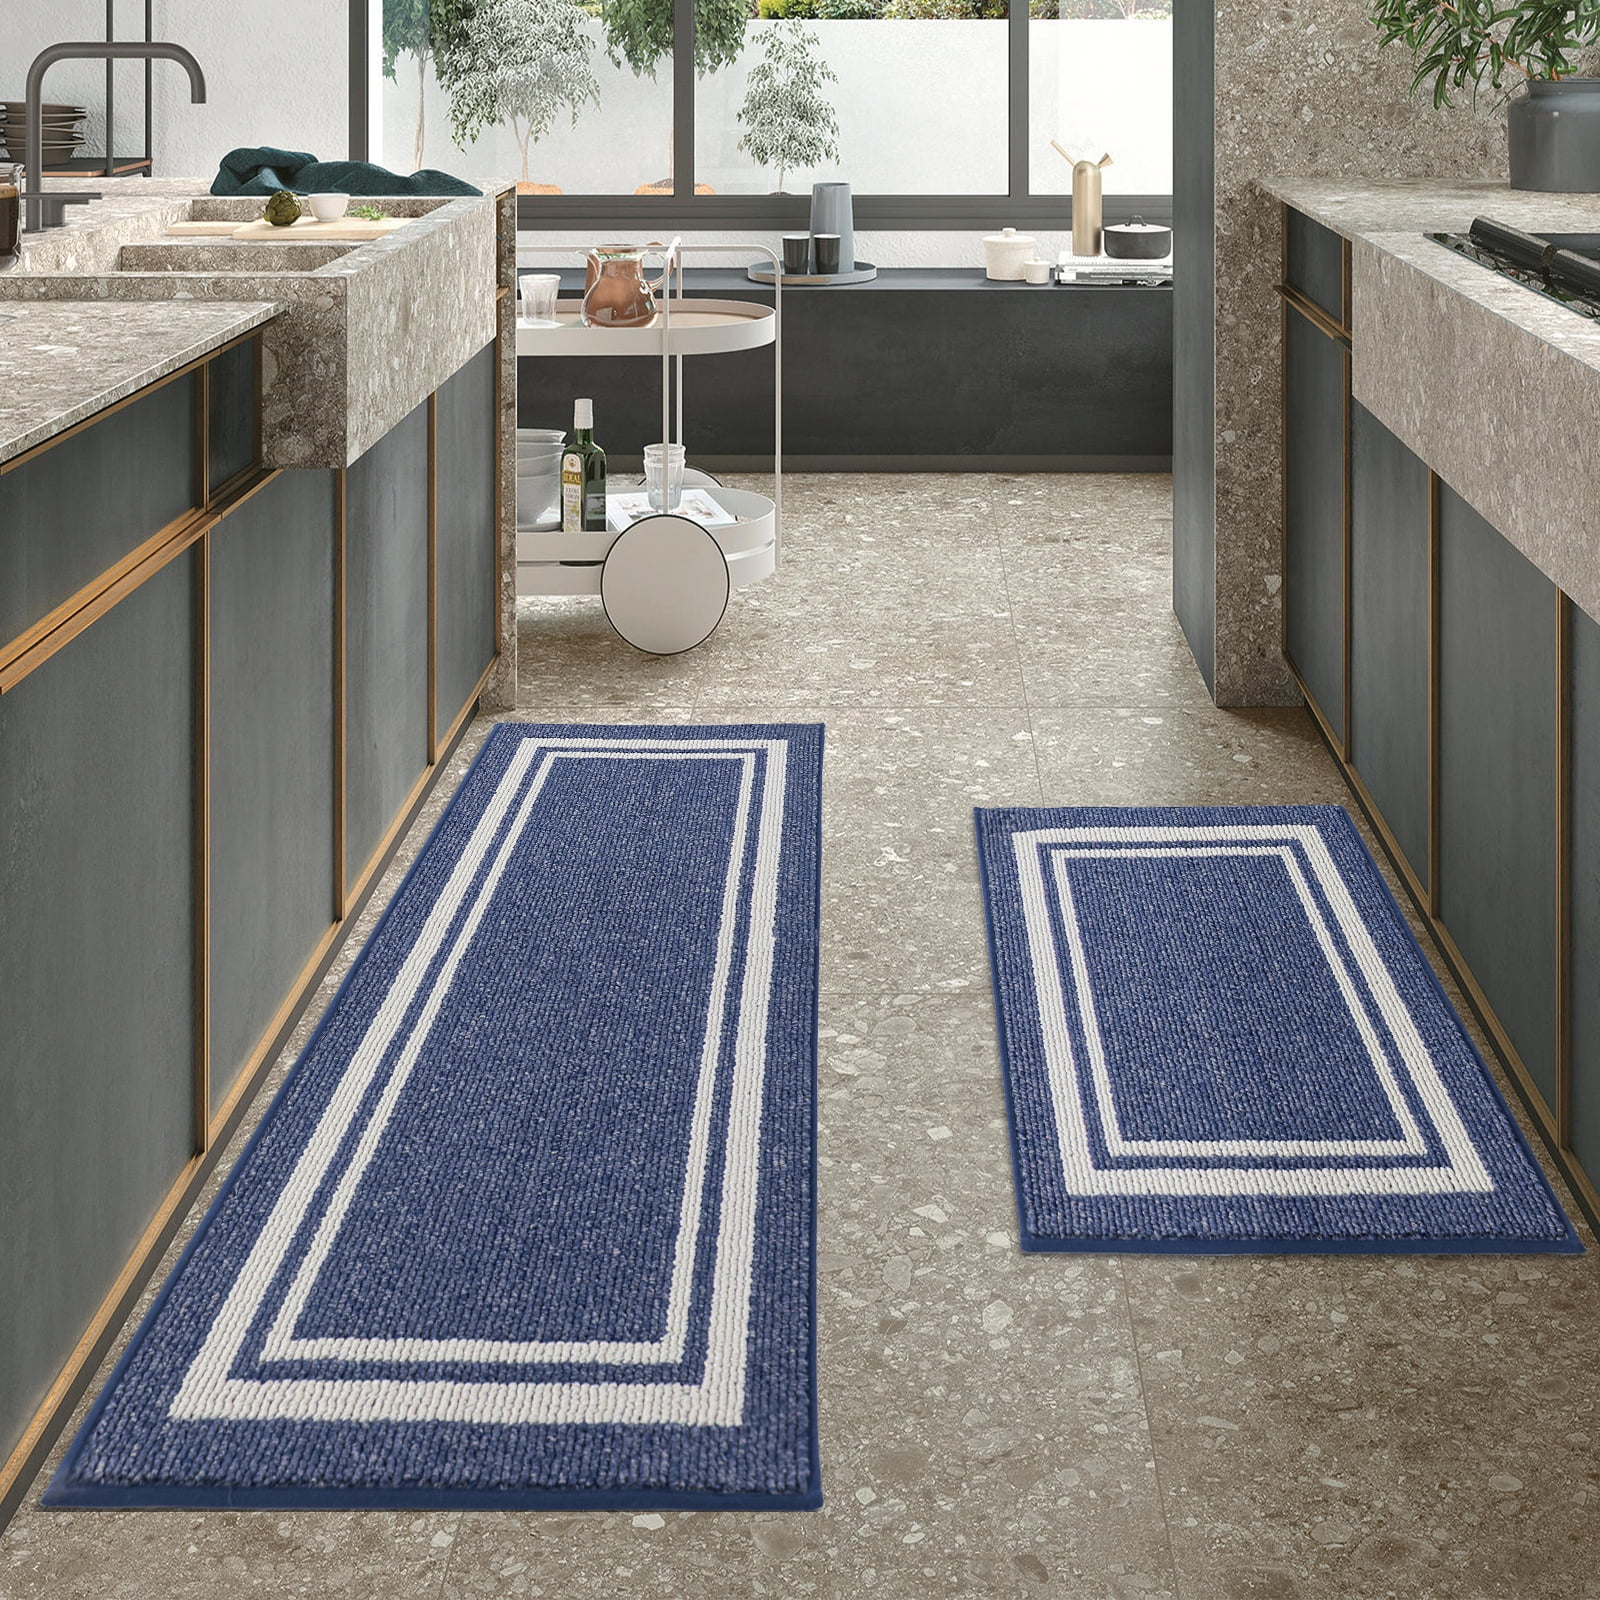 COSY HOMEER 28X18 Inch Washable Kitchen Rug Mats are Made of Polypropylene  Square Rug Cushion Which is Anti Slippery and Stain Resistance,Br